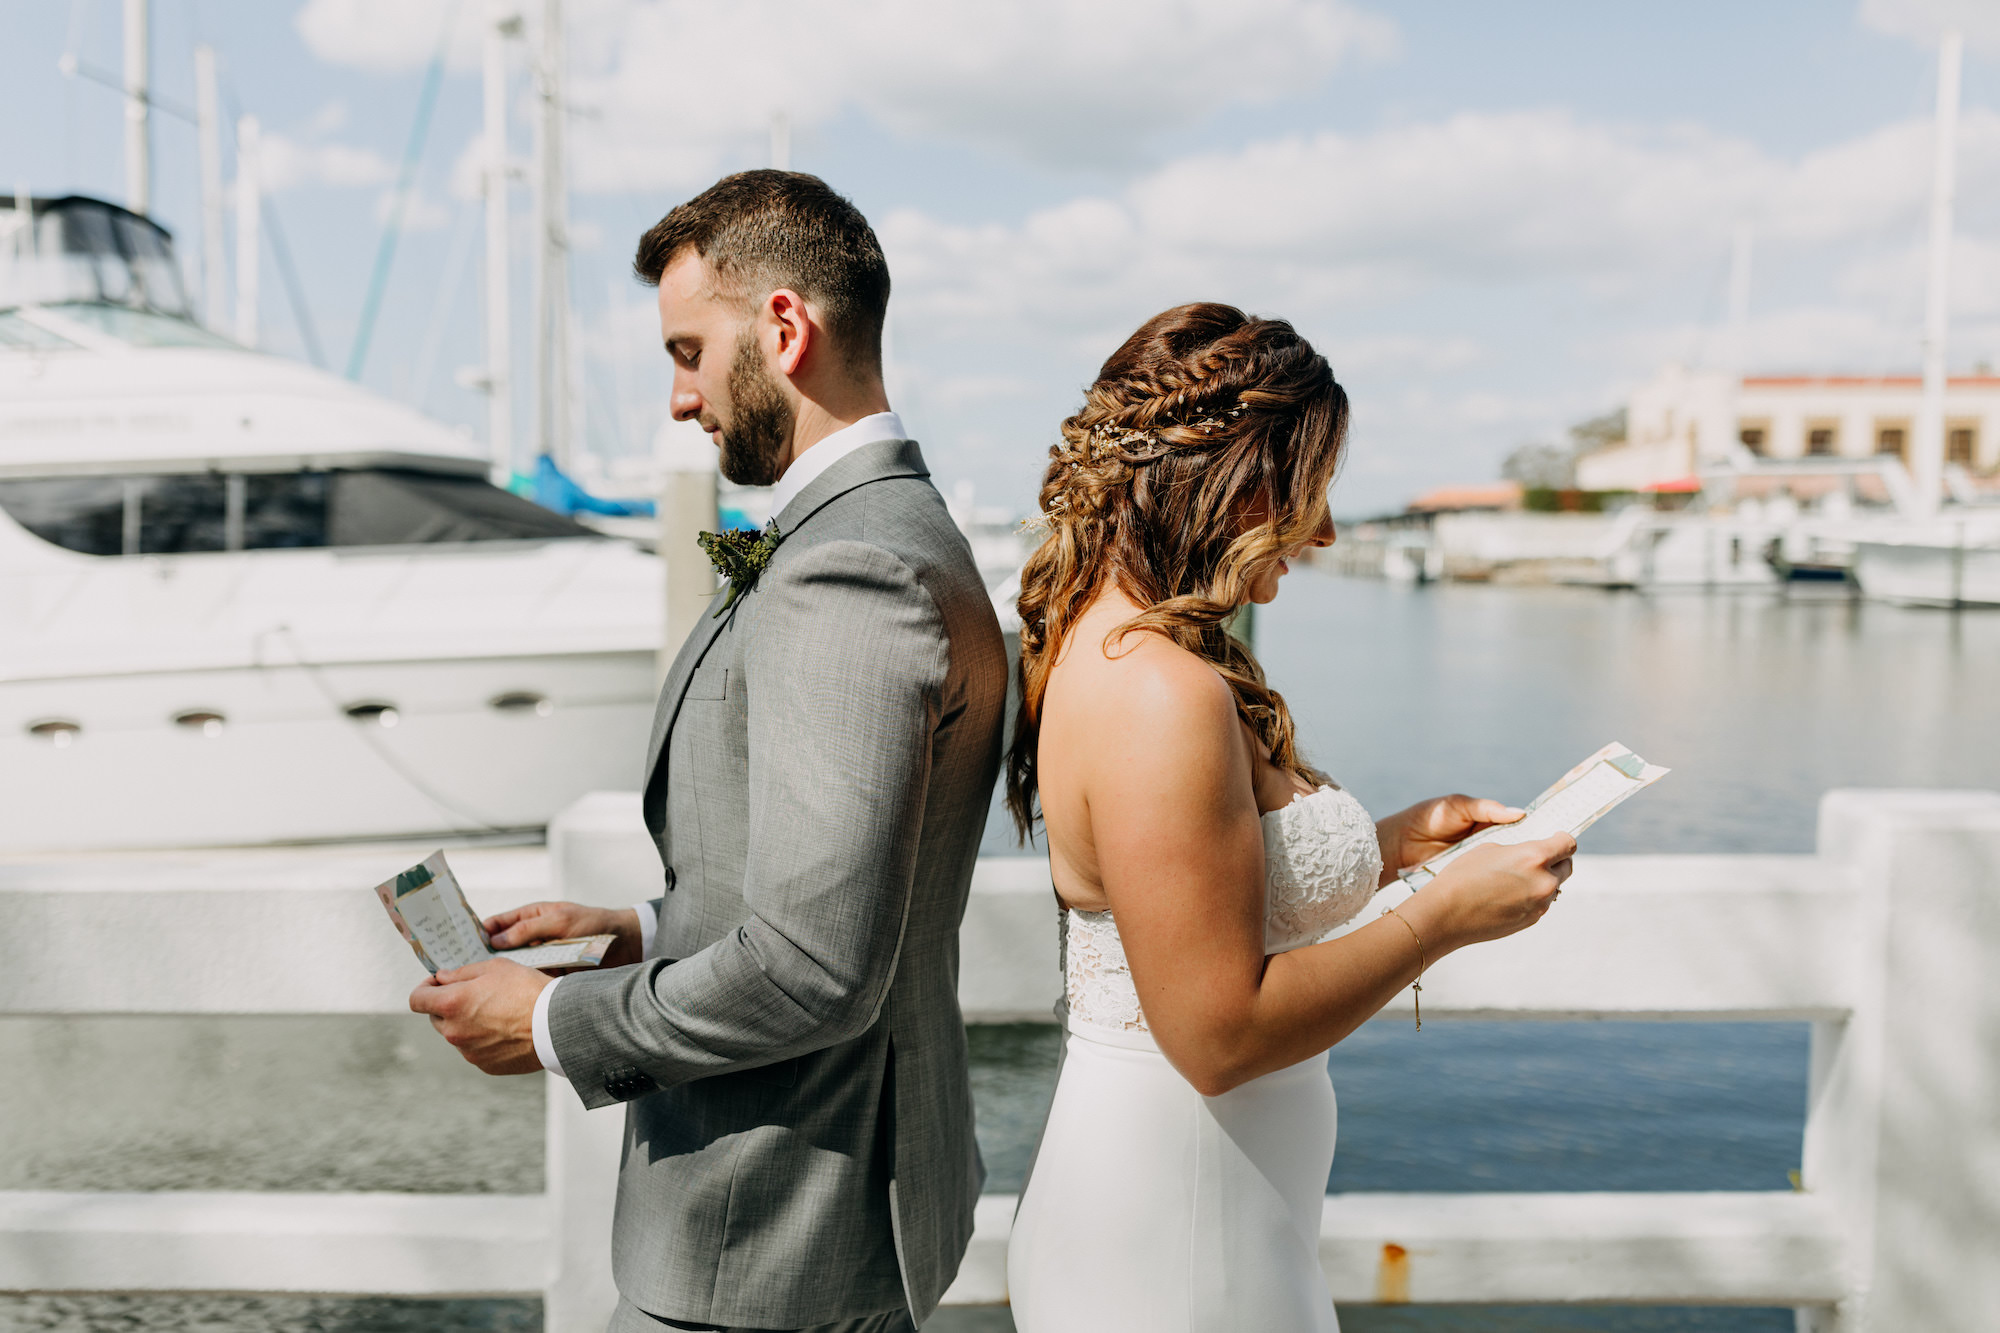 Waterfront Bride and Groom First Look Private Vow Reading Wedding Portrait | Sarasota Wedding Photographer Amber McWhorter Photography